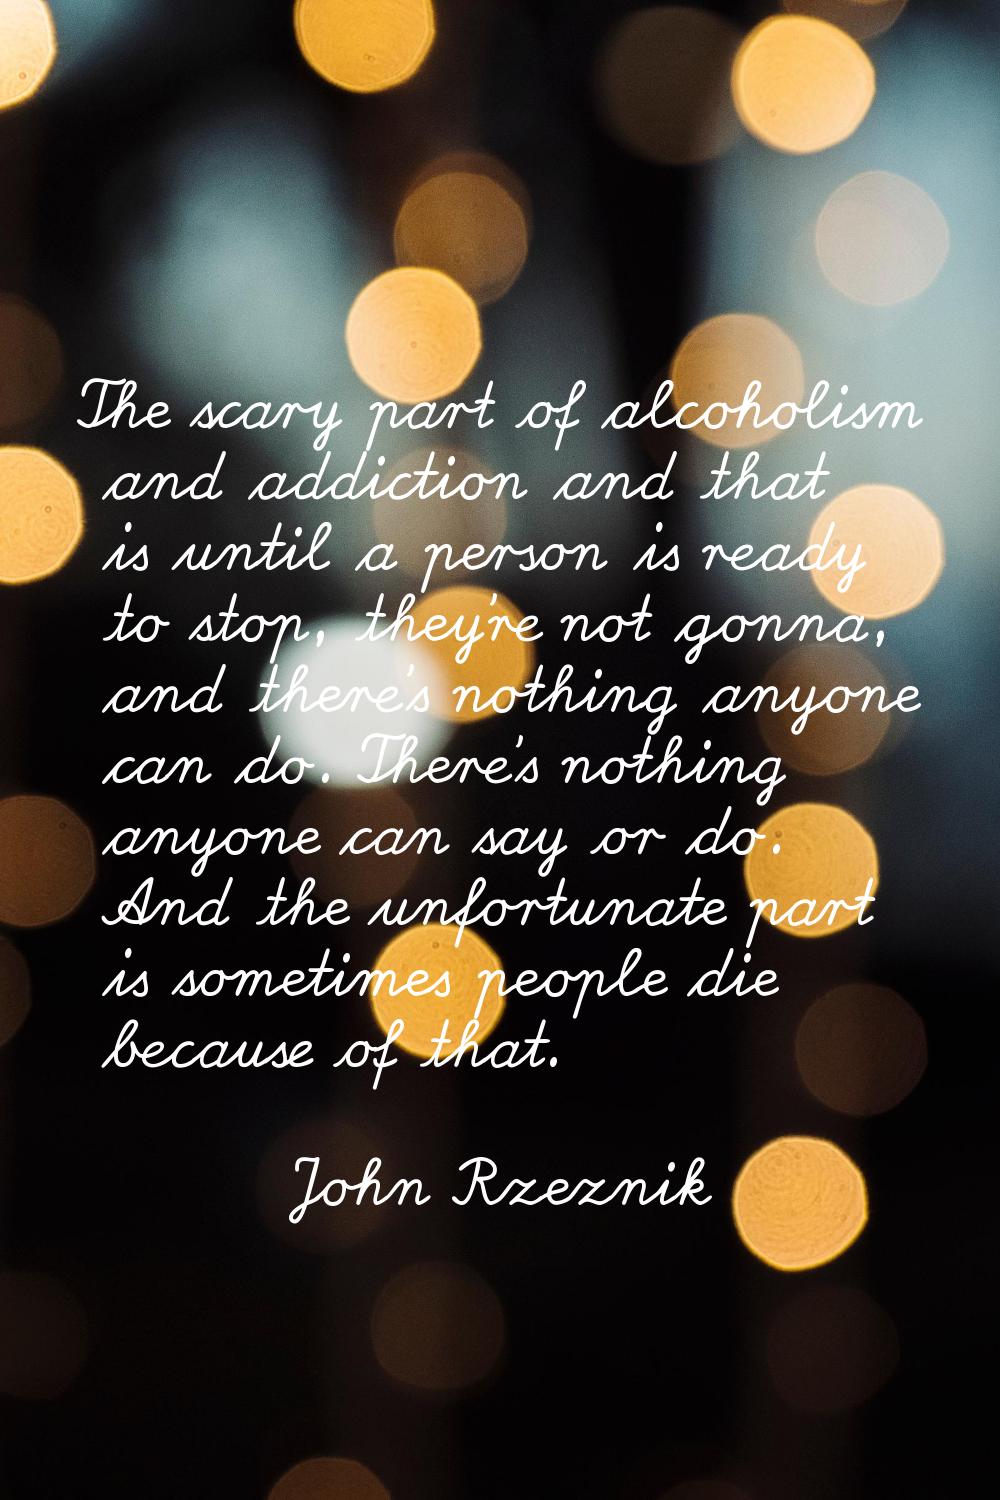 The scary part of alcoholism and addiction and that is until a person is ready to stop, they're not